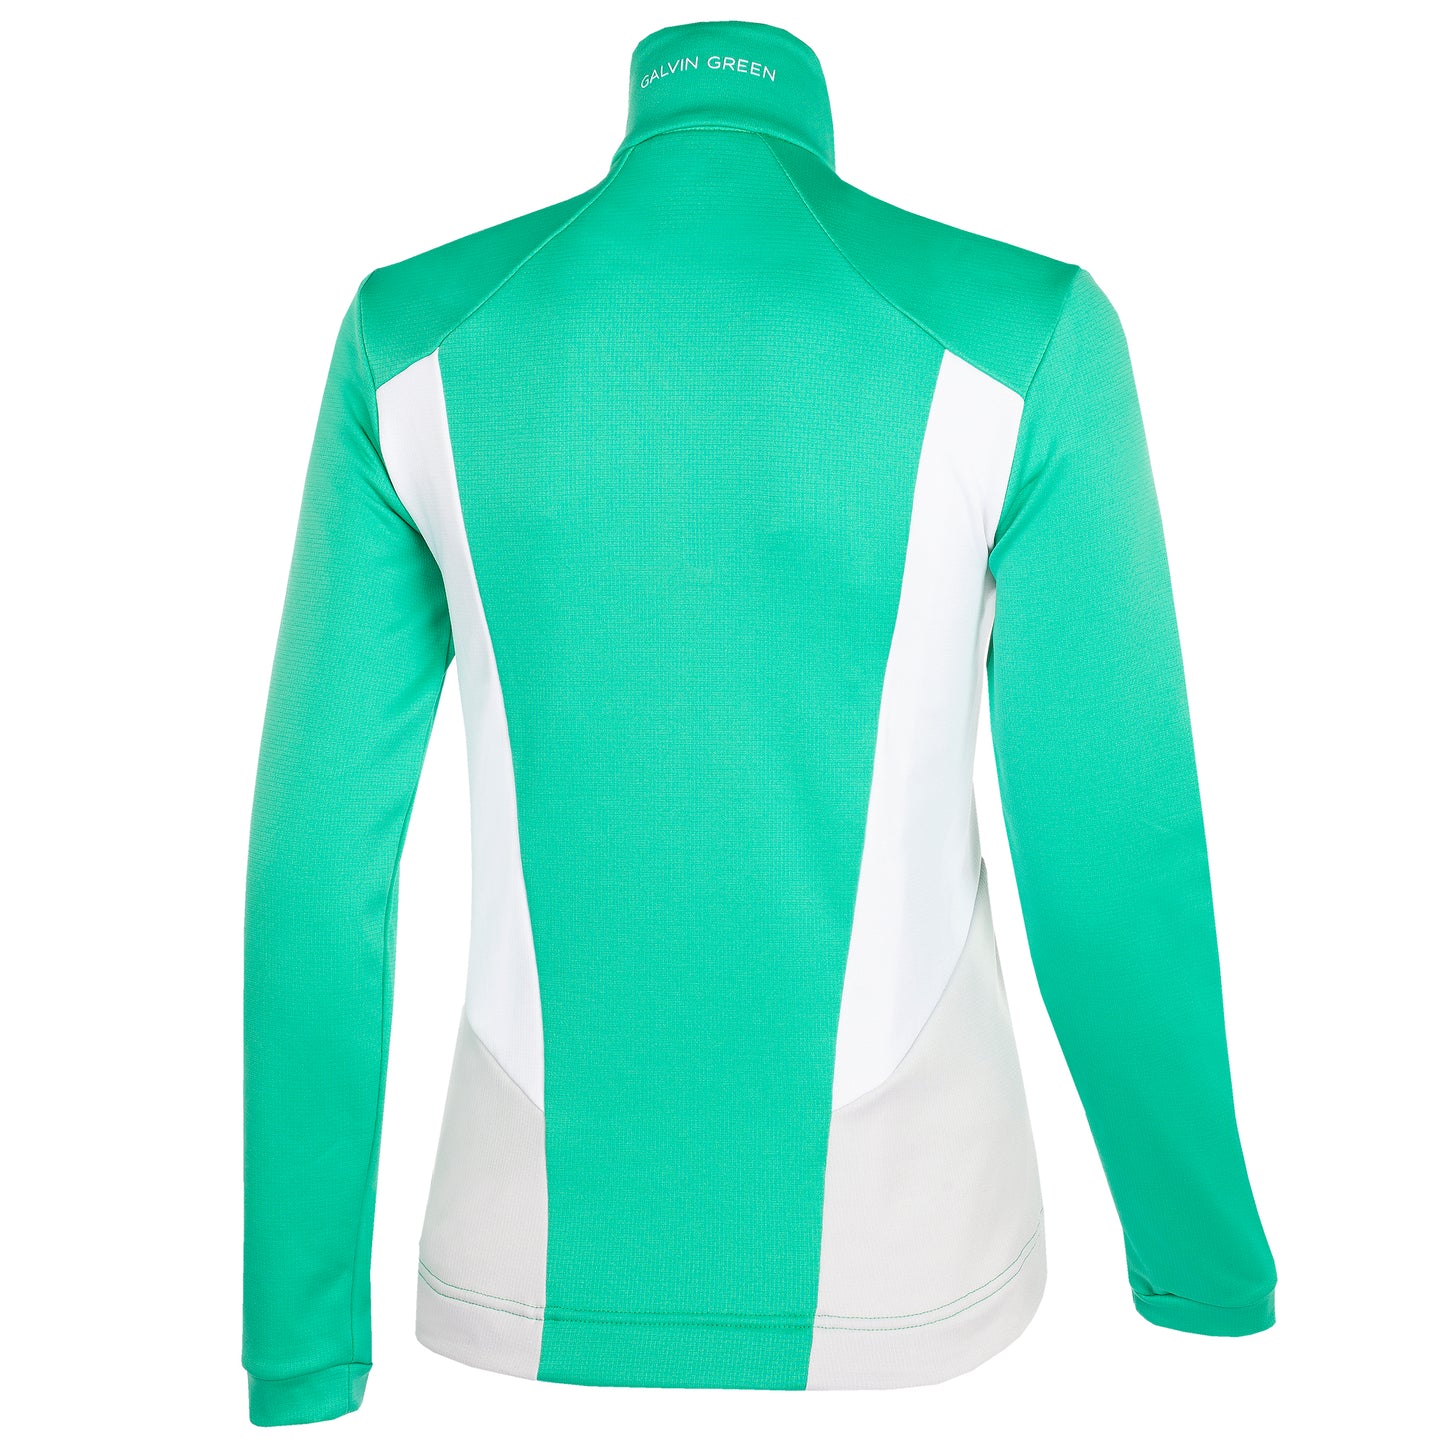 Galvin Green Ladies INSULA Jacket with Contrast Panels in Holly Green